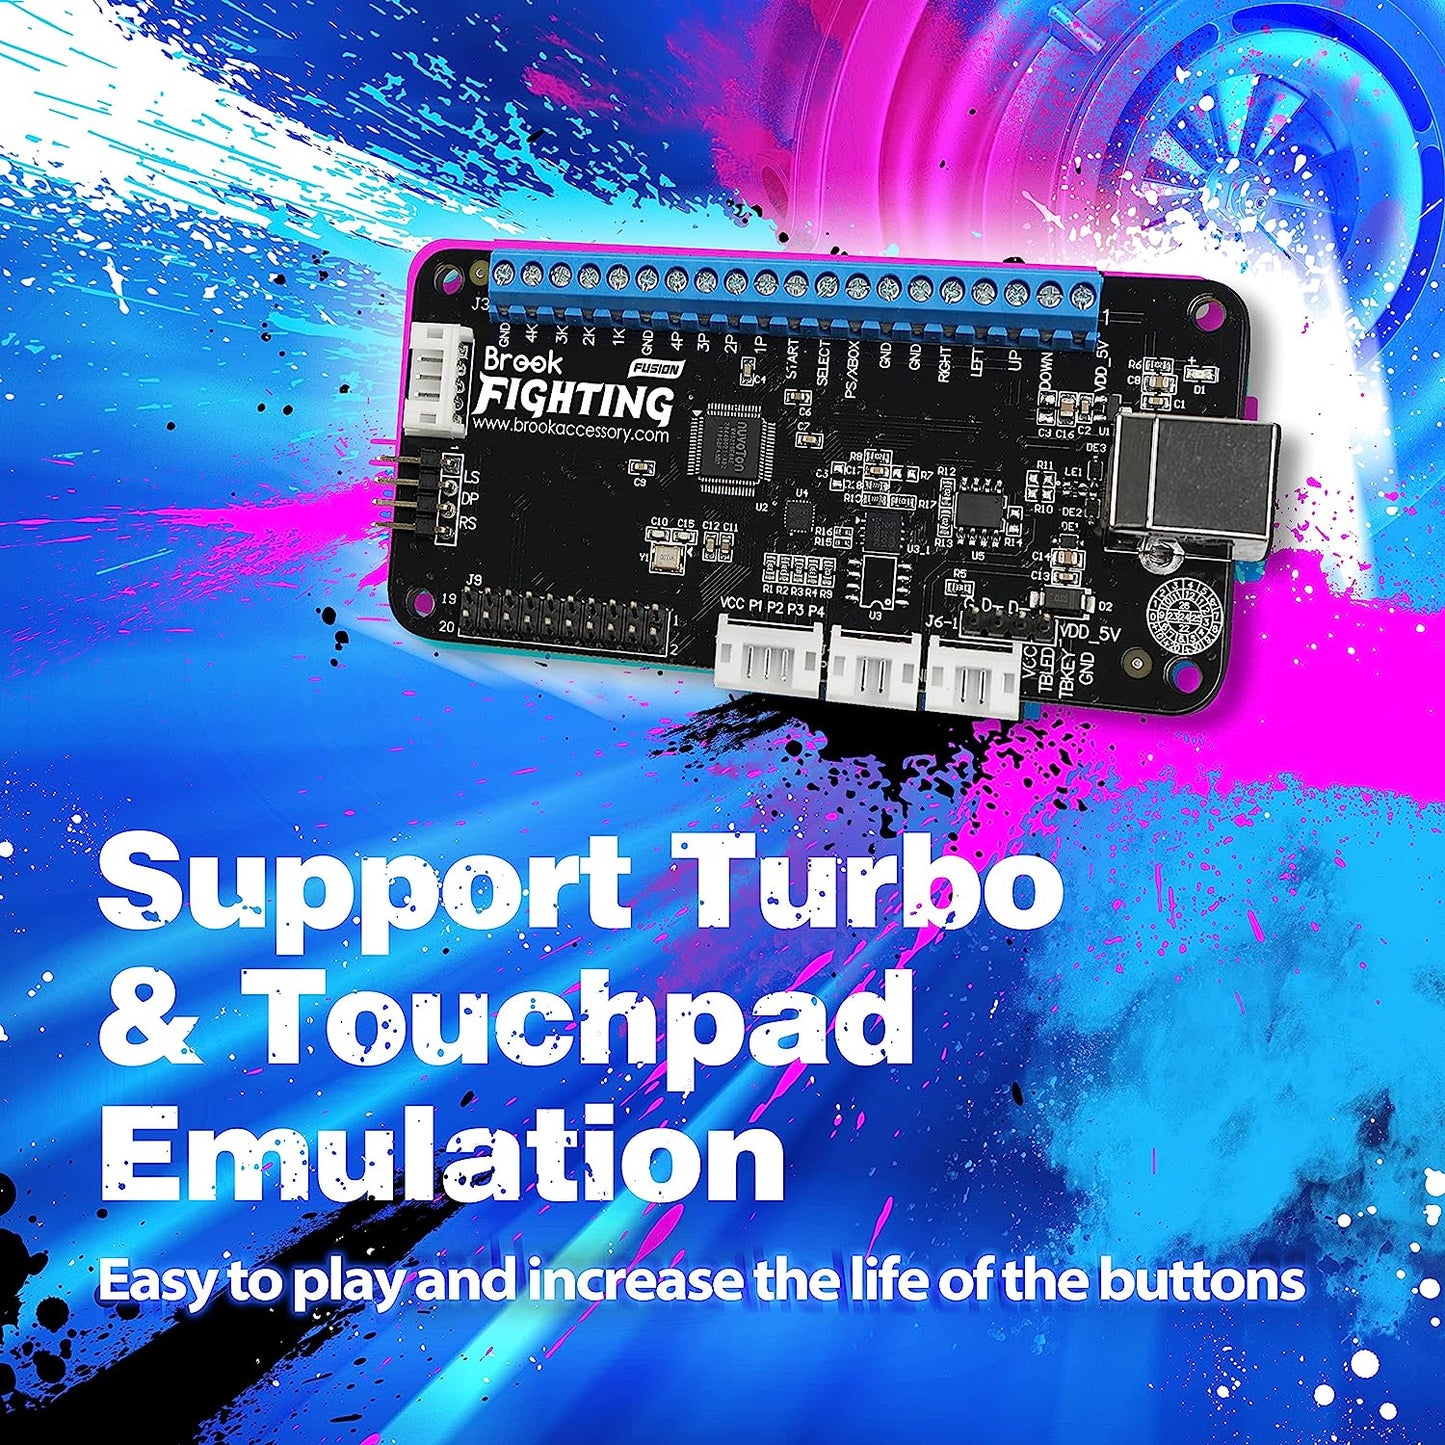 Universal Fighting Board Fusion with Headers